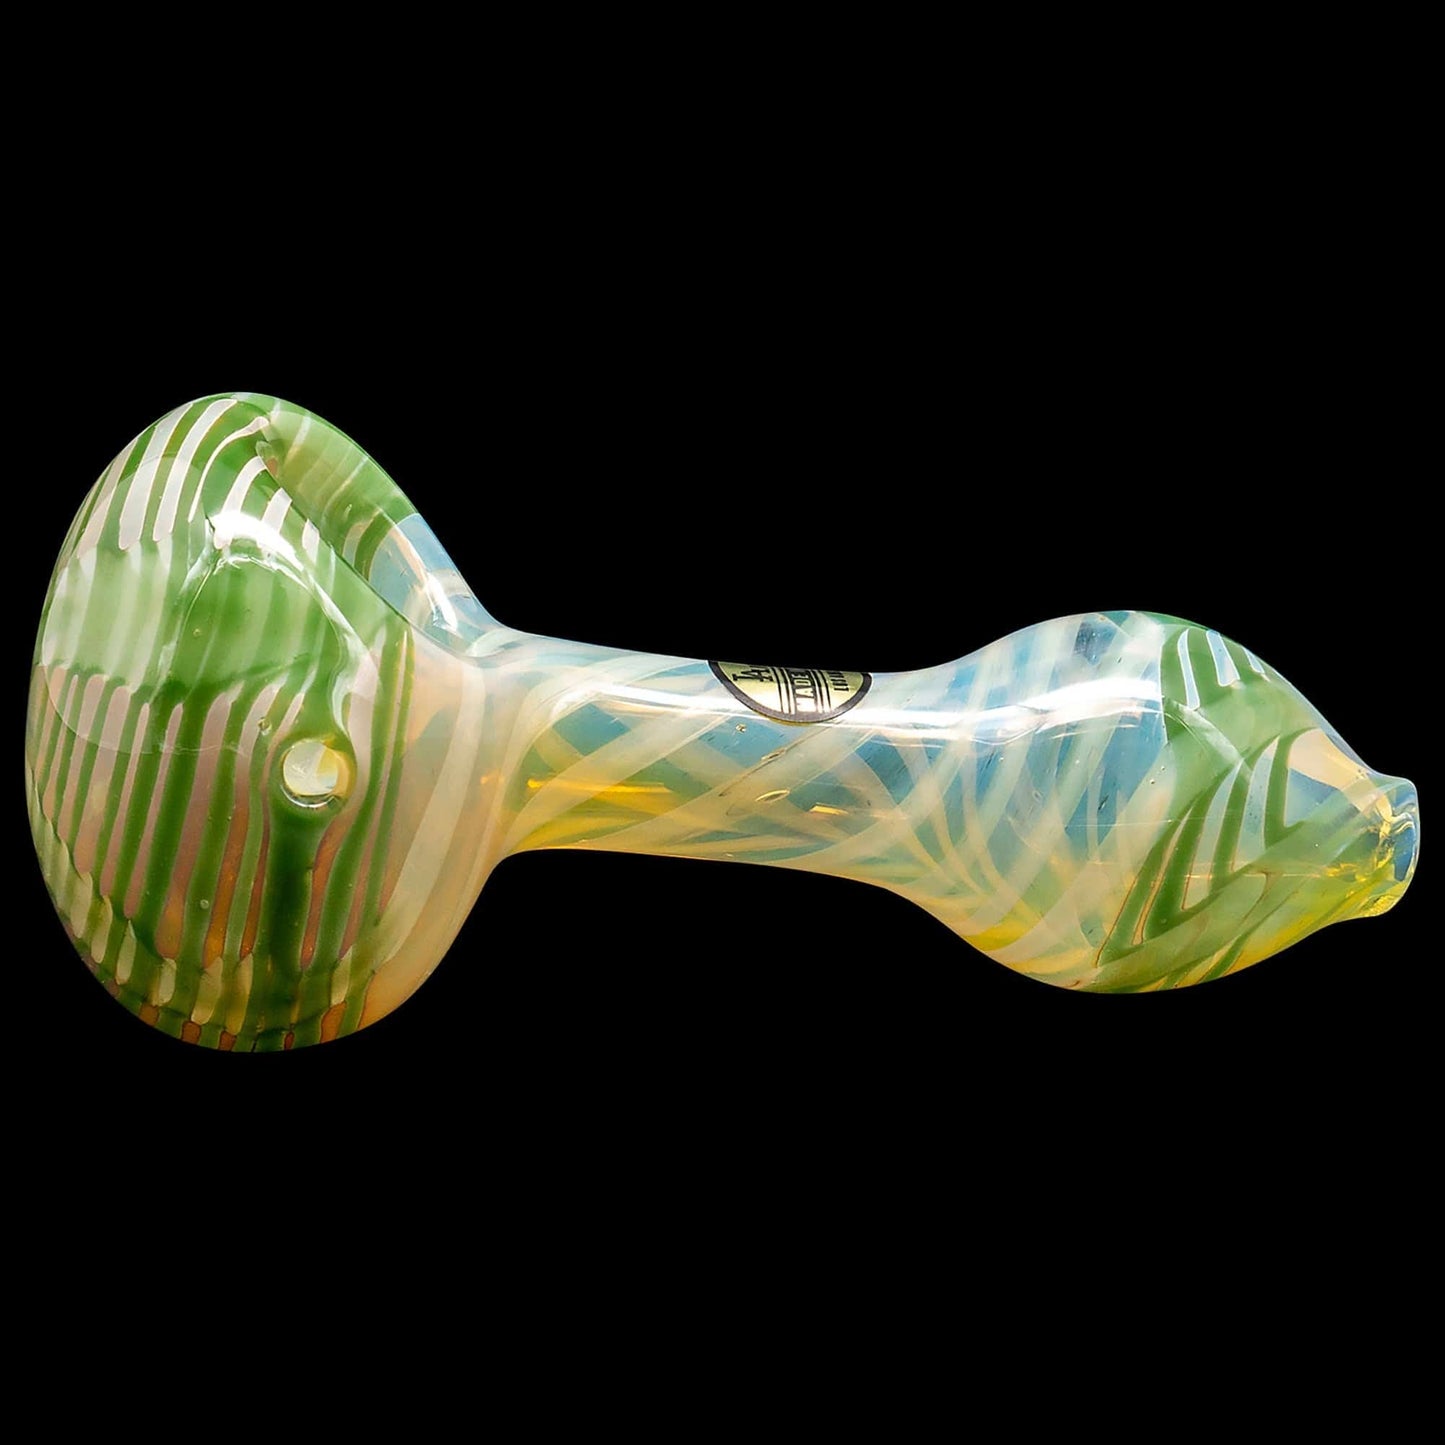 LA Pipes Hand Pipe "Twisty Cane" Spoon Glass Pipe (Various Colors)